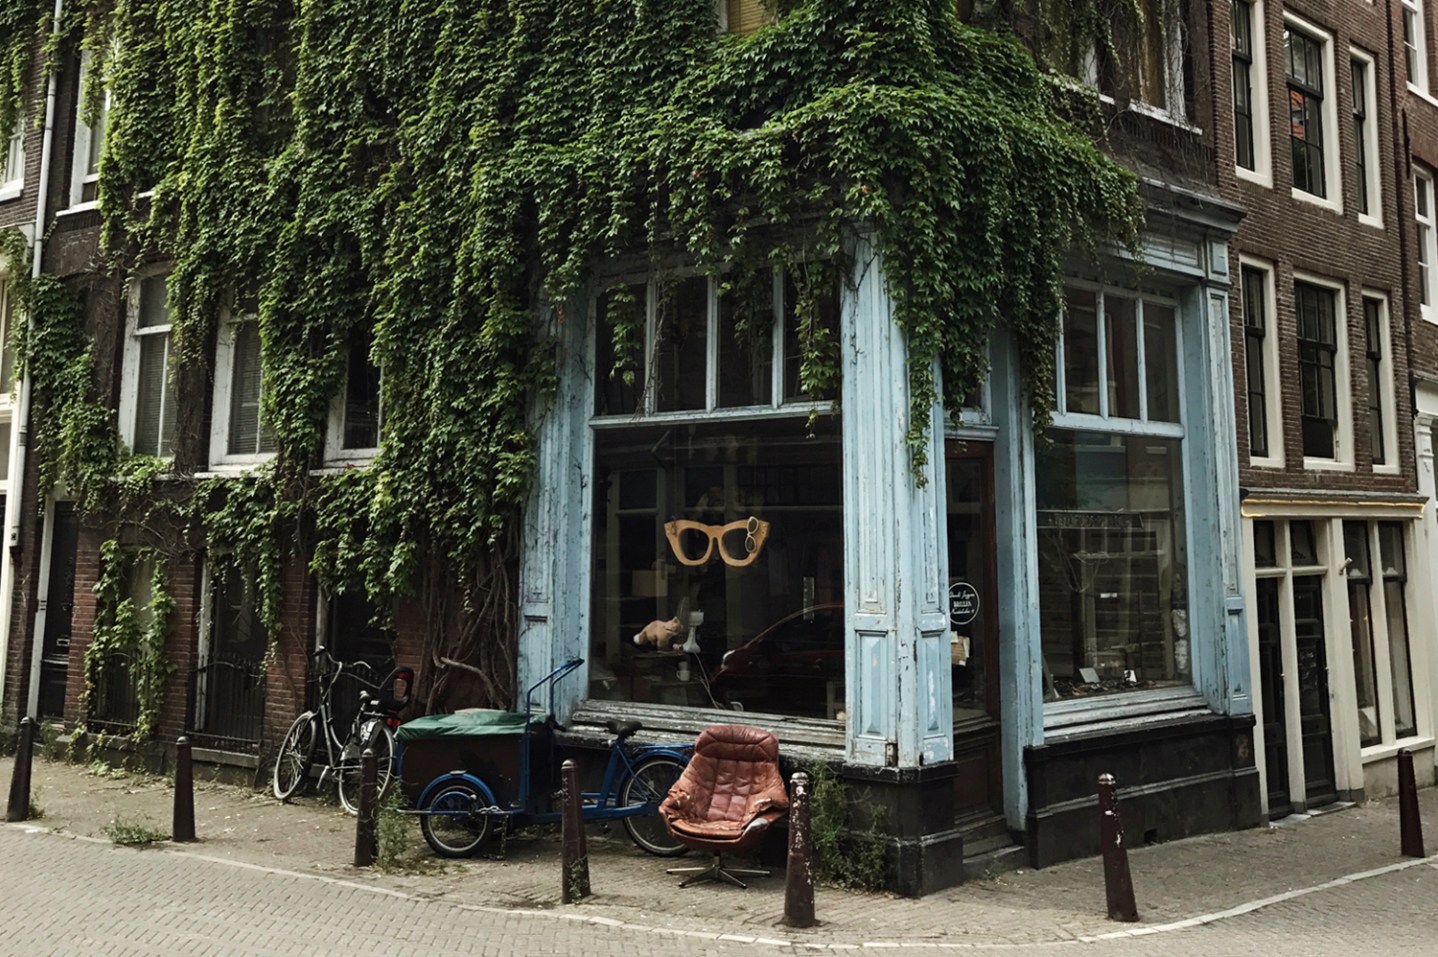 Each of Amsterdam’s diverse neighborhoods offers truly unique microcultures